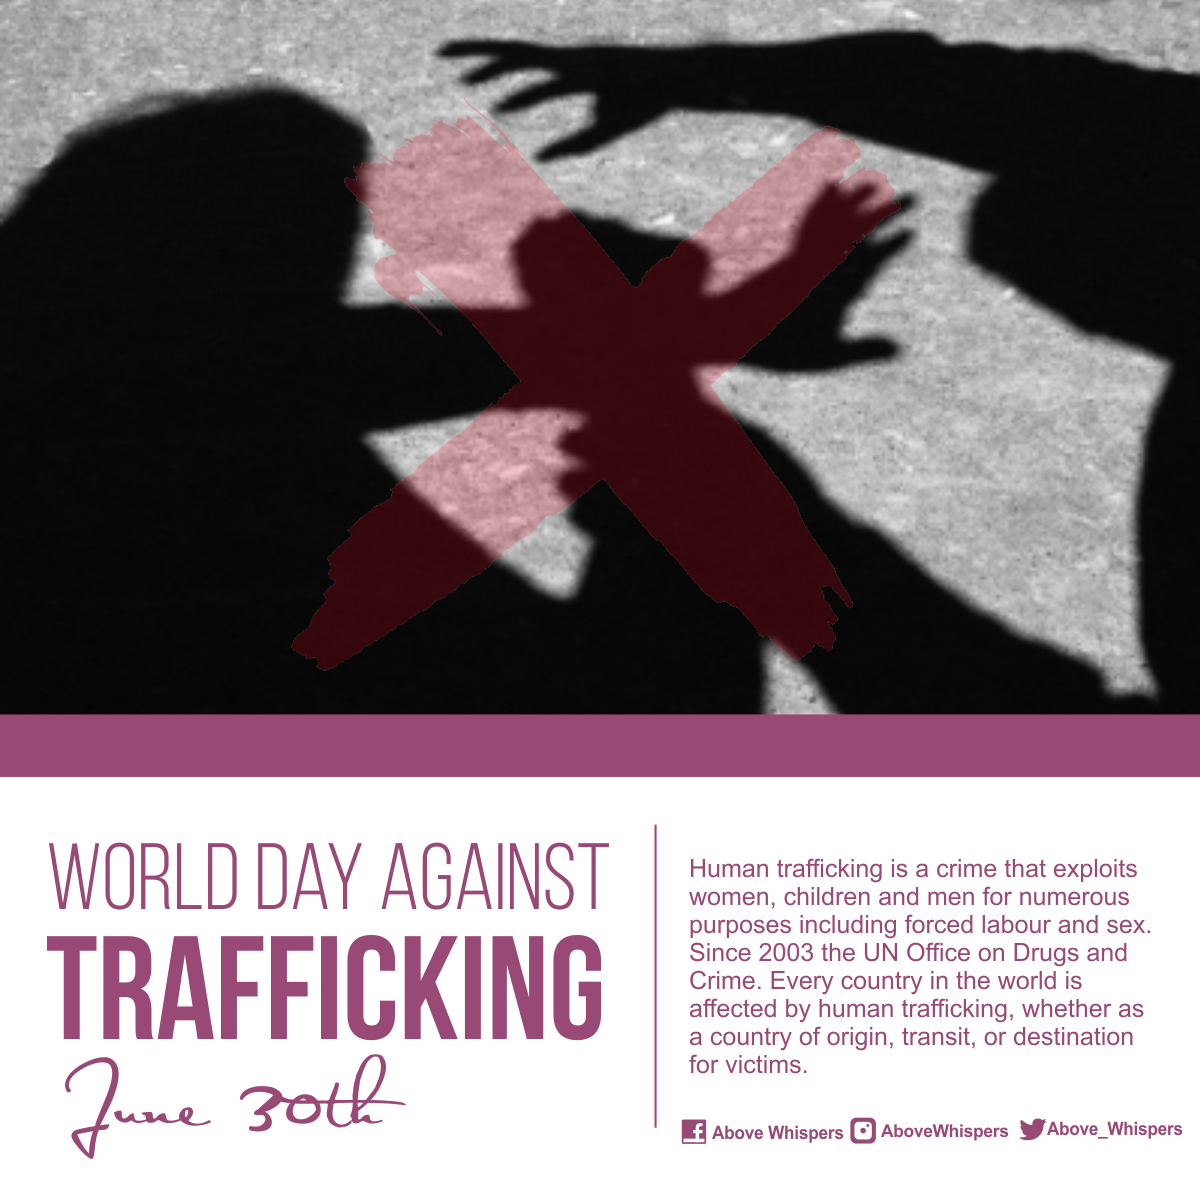 World Day Against Trafficking